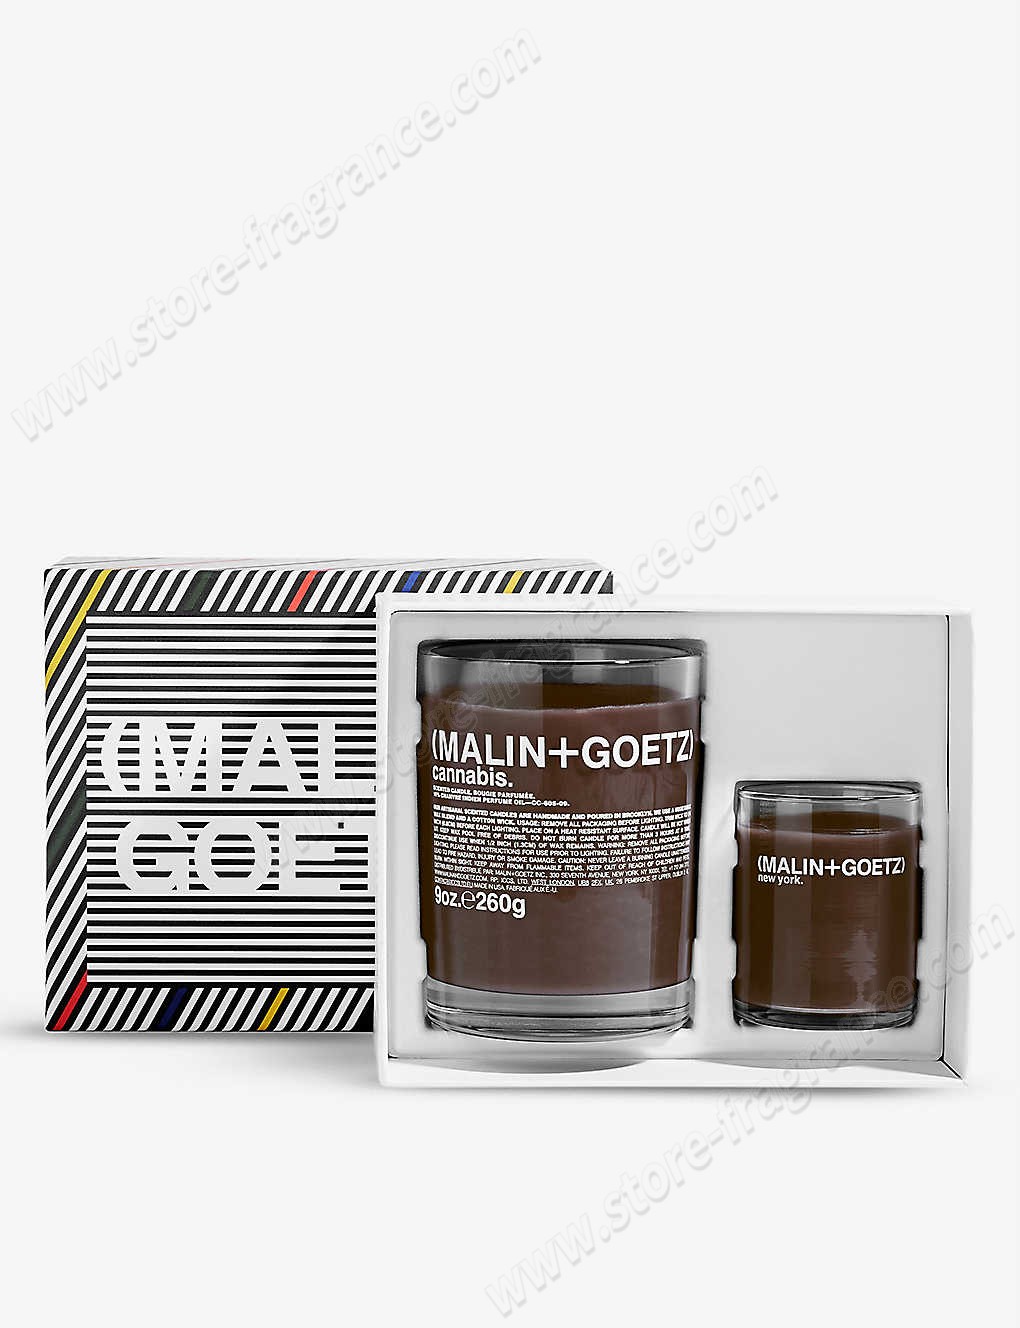 MALIN + GOETZ/Get Lit cannabis candle and votive gift set Limit Offer - -0